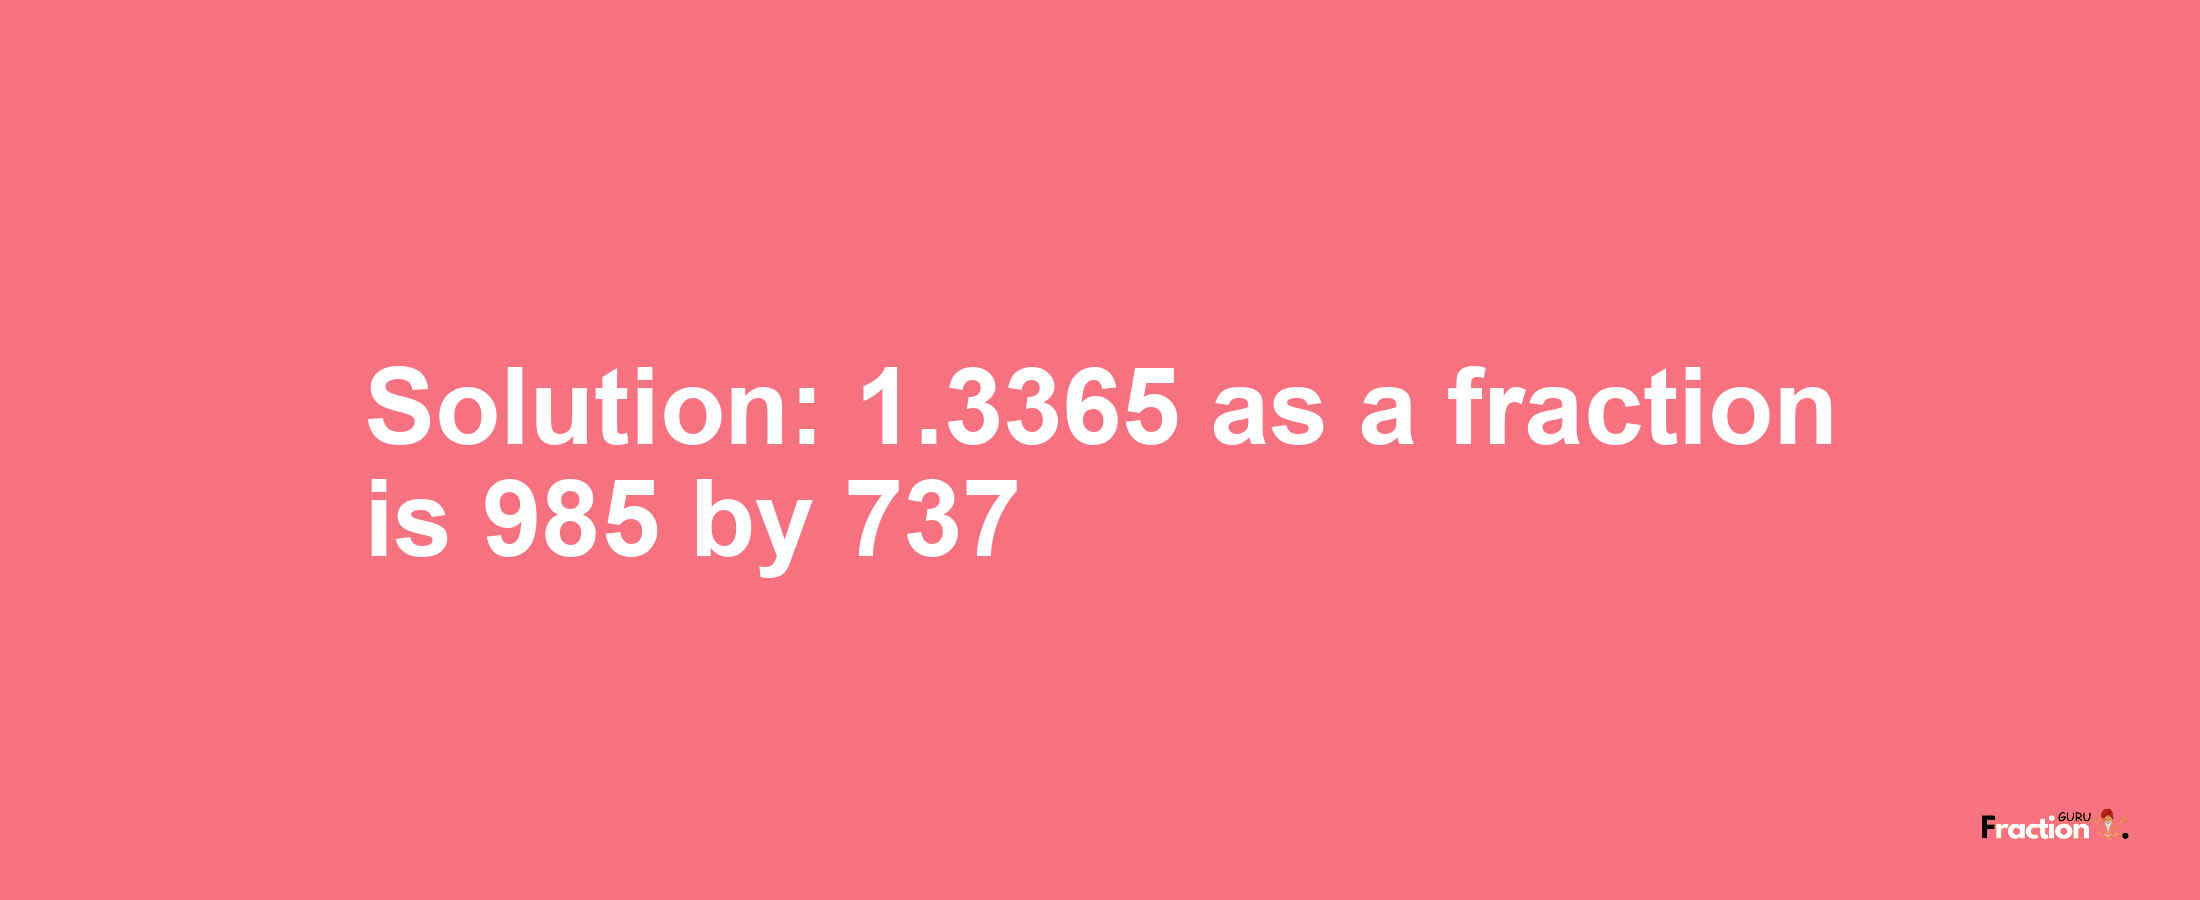 Solution:1.3365 as a fraction is 985/737